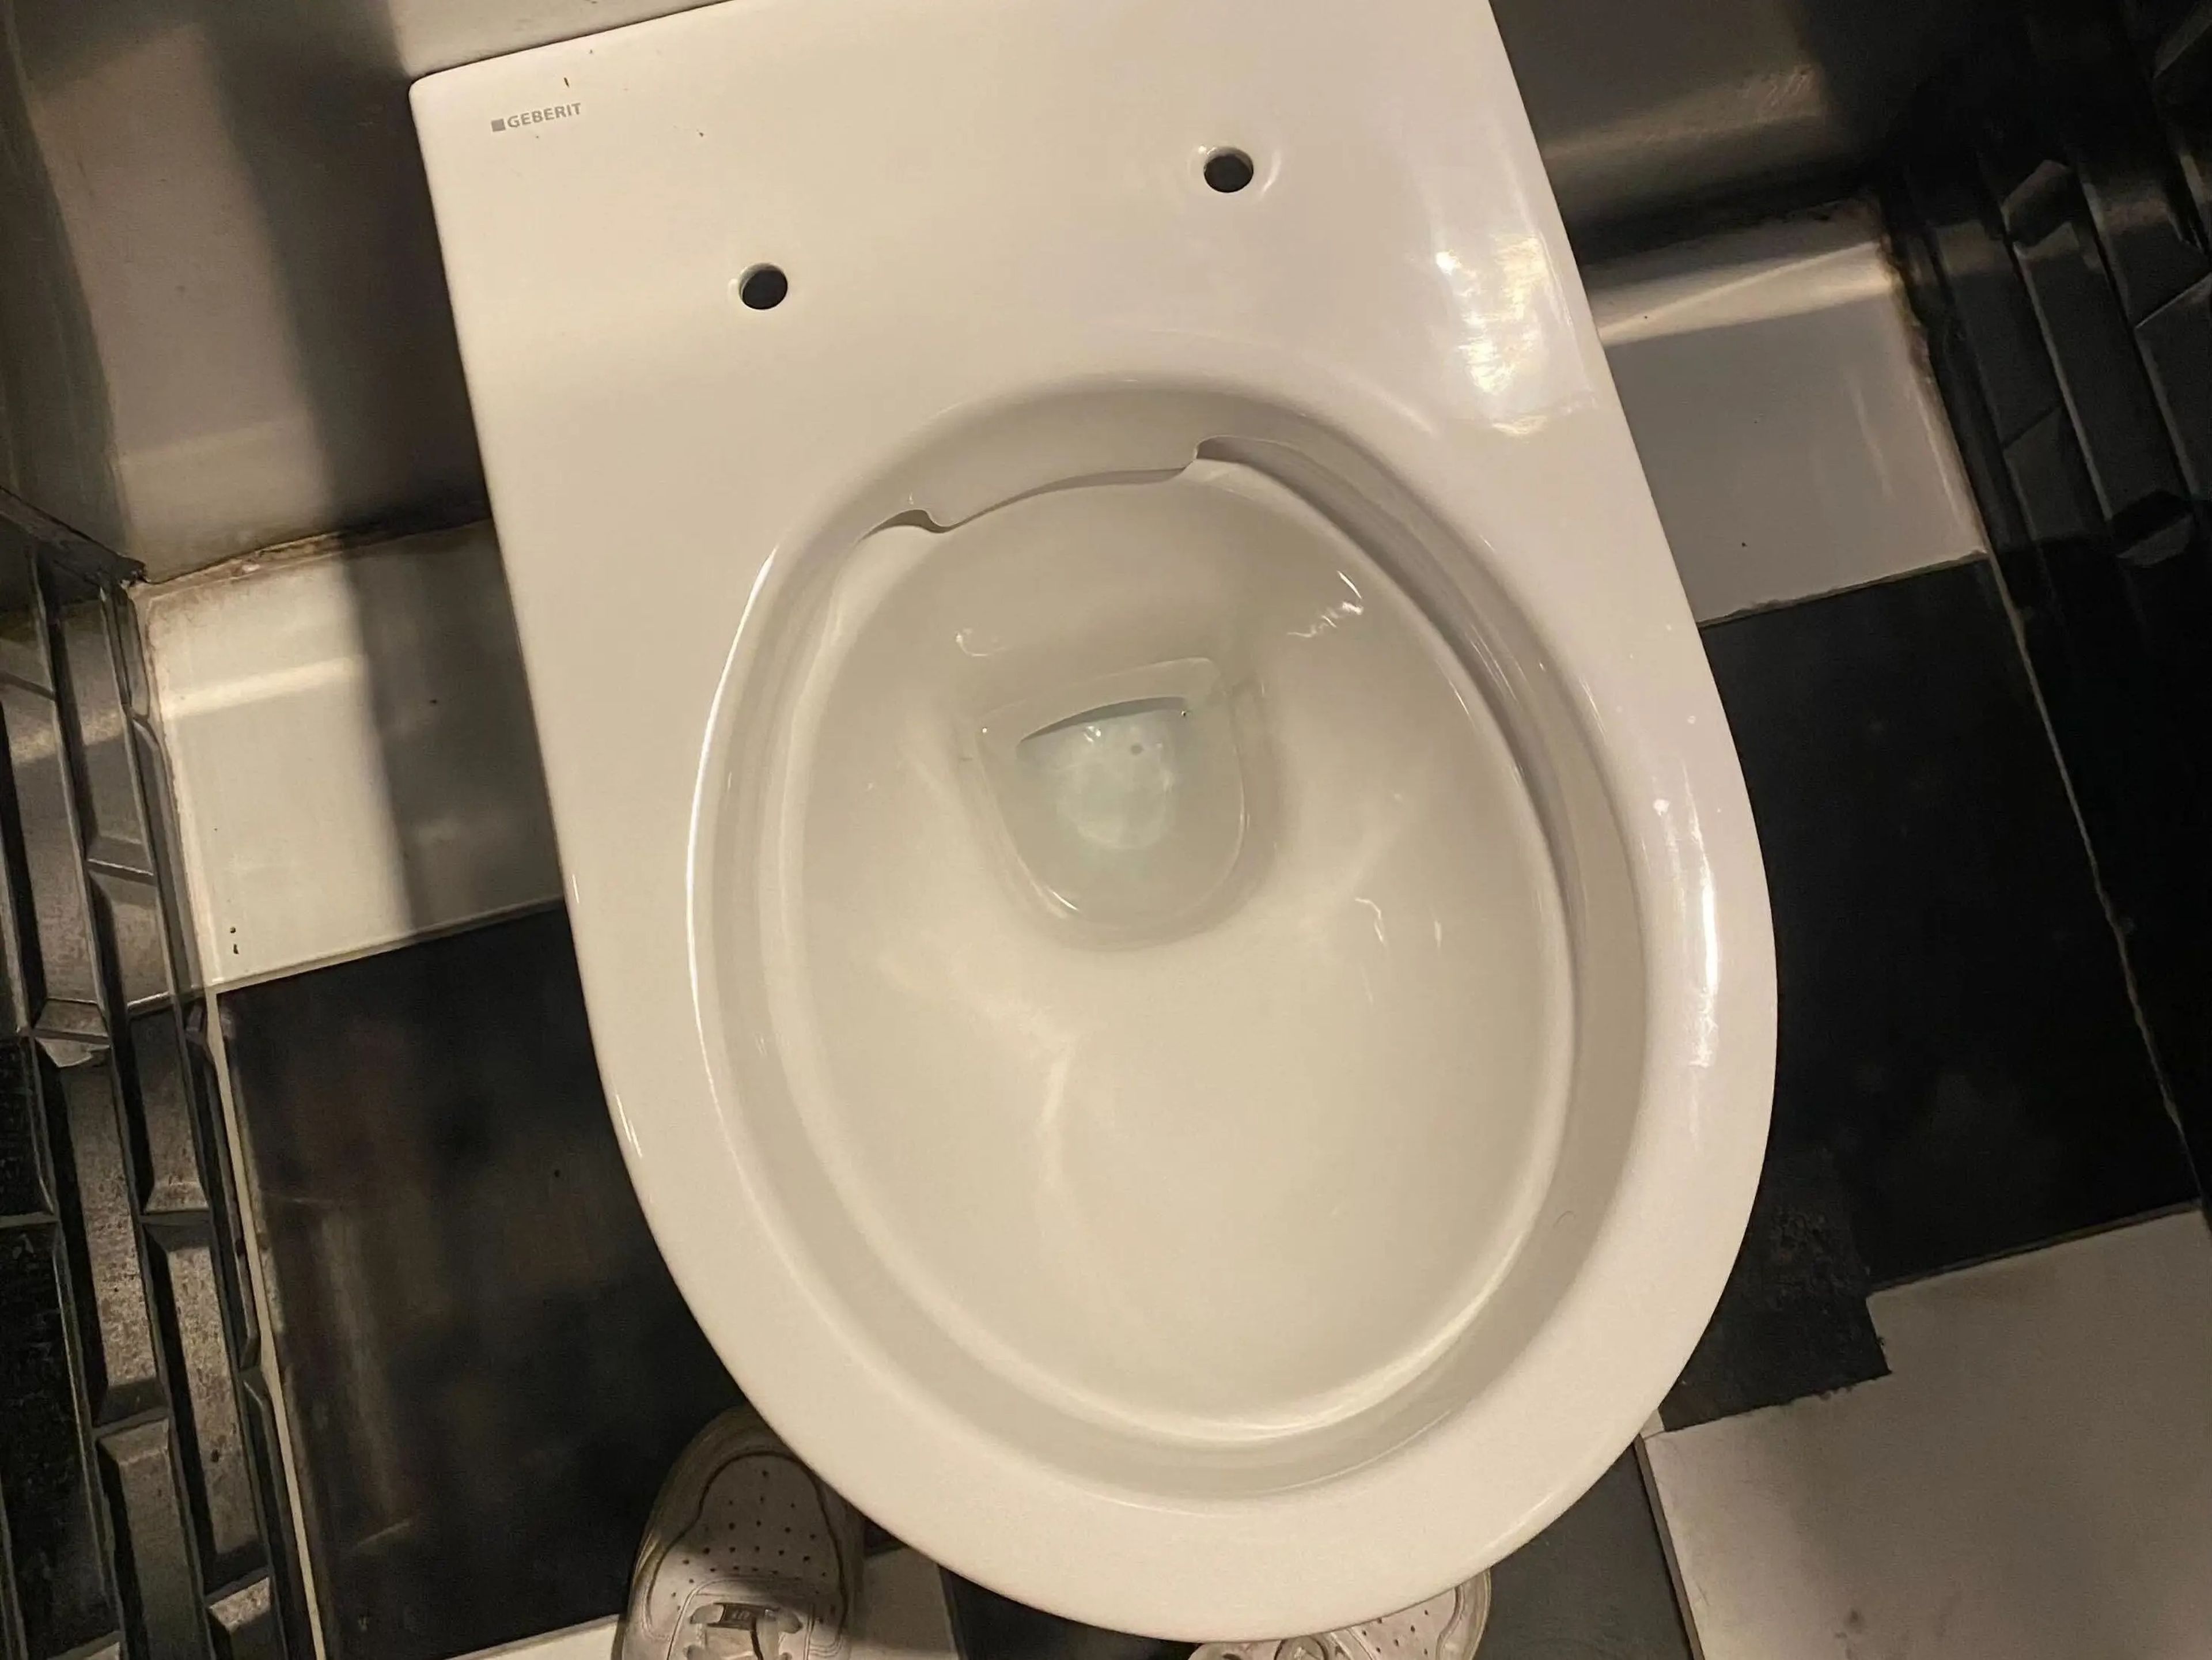 A toilet without a seat.